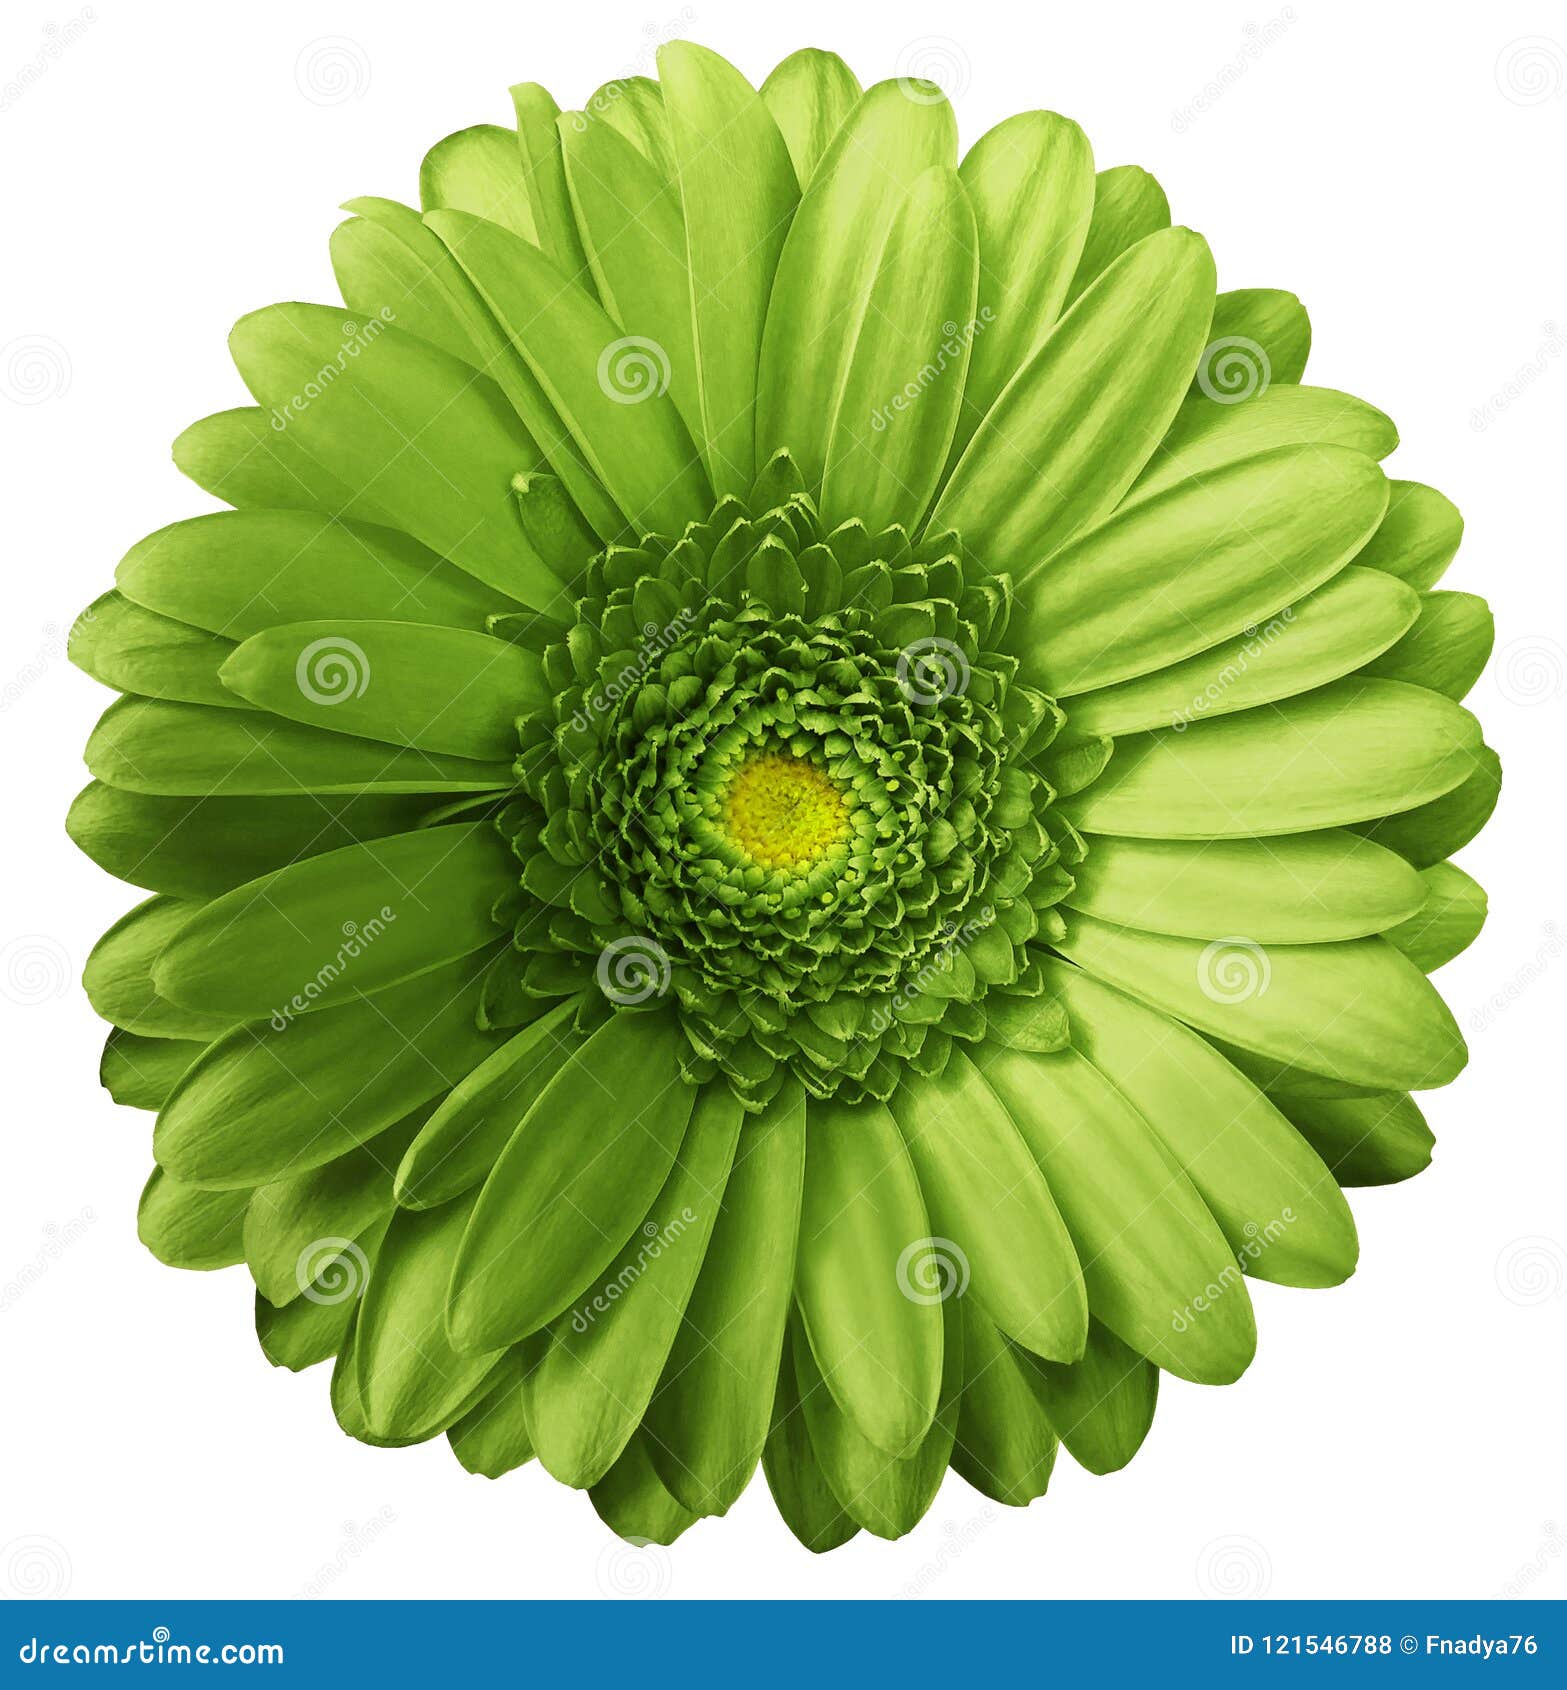 gerbera green flower on white  background with clipping path. no shadows. closeup.